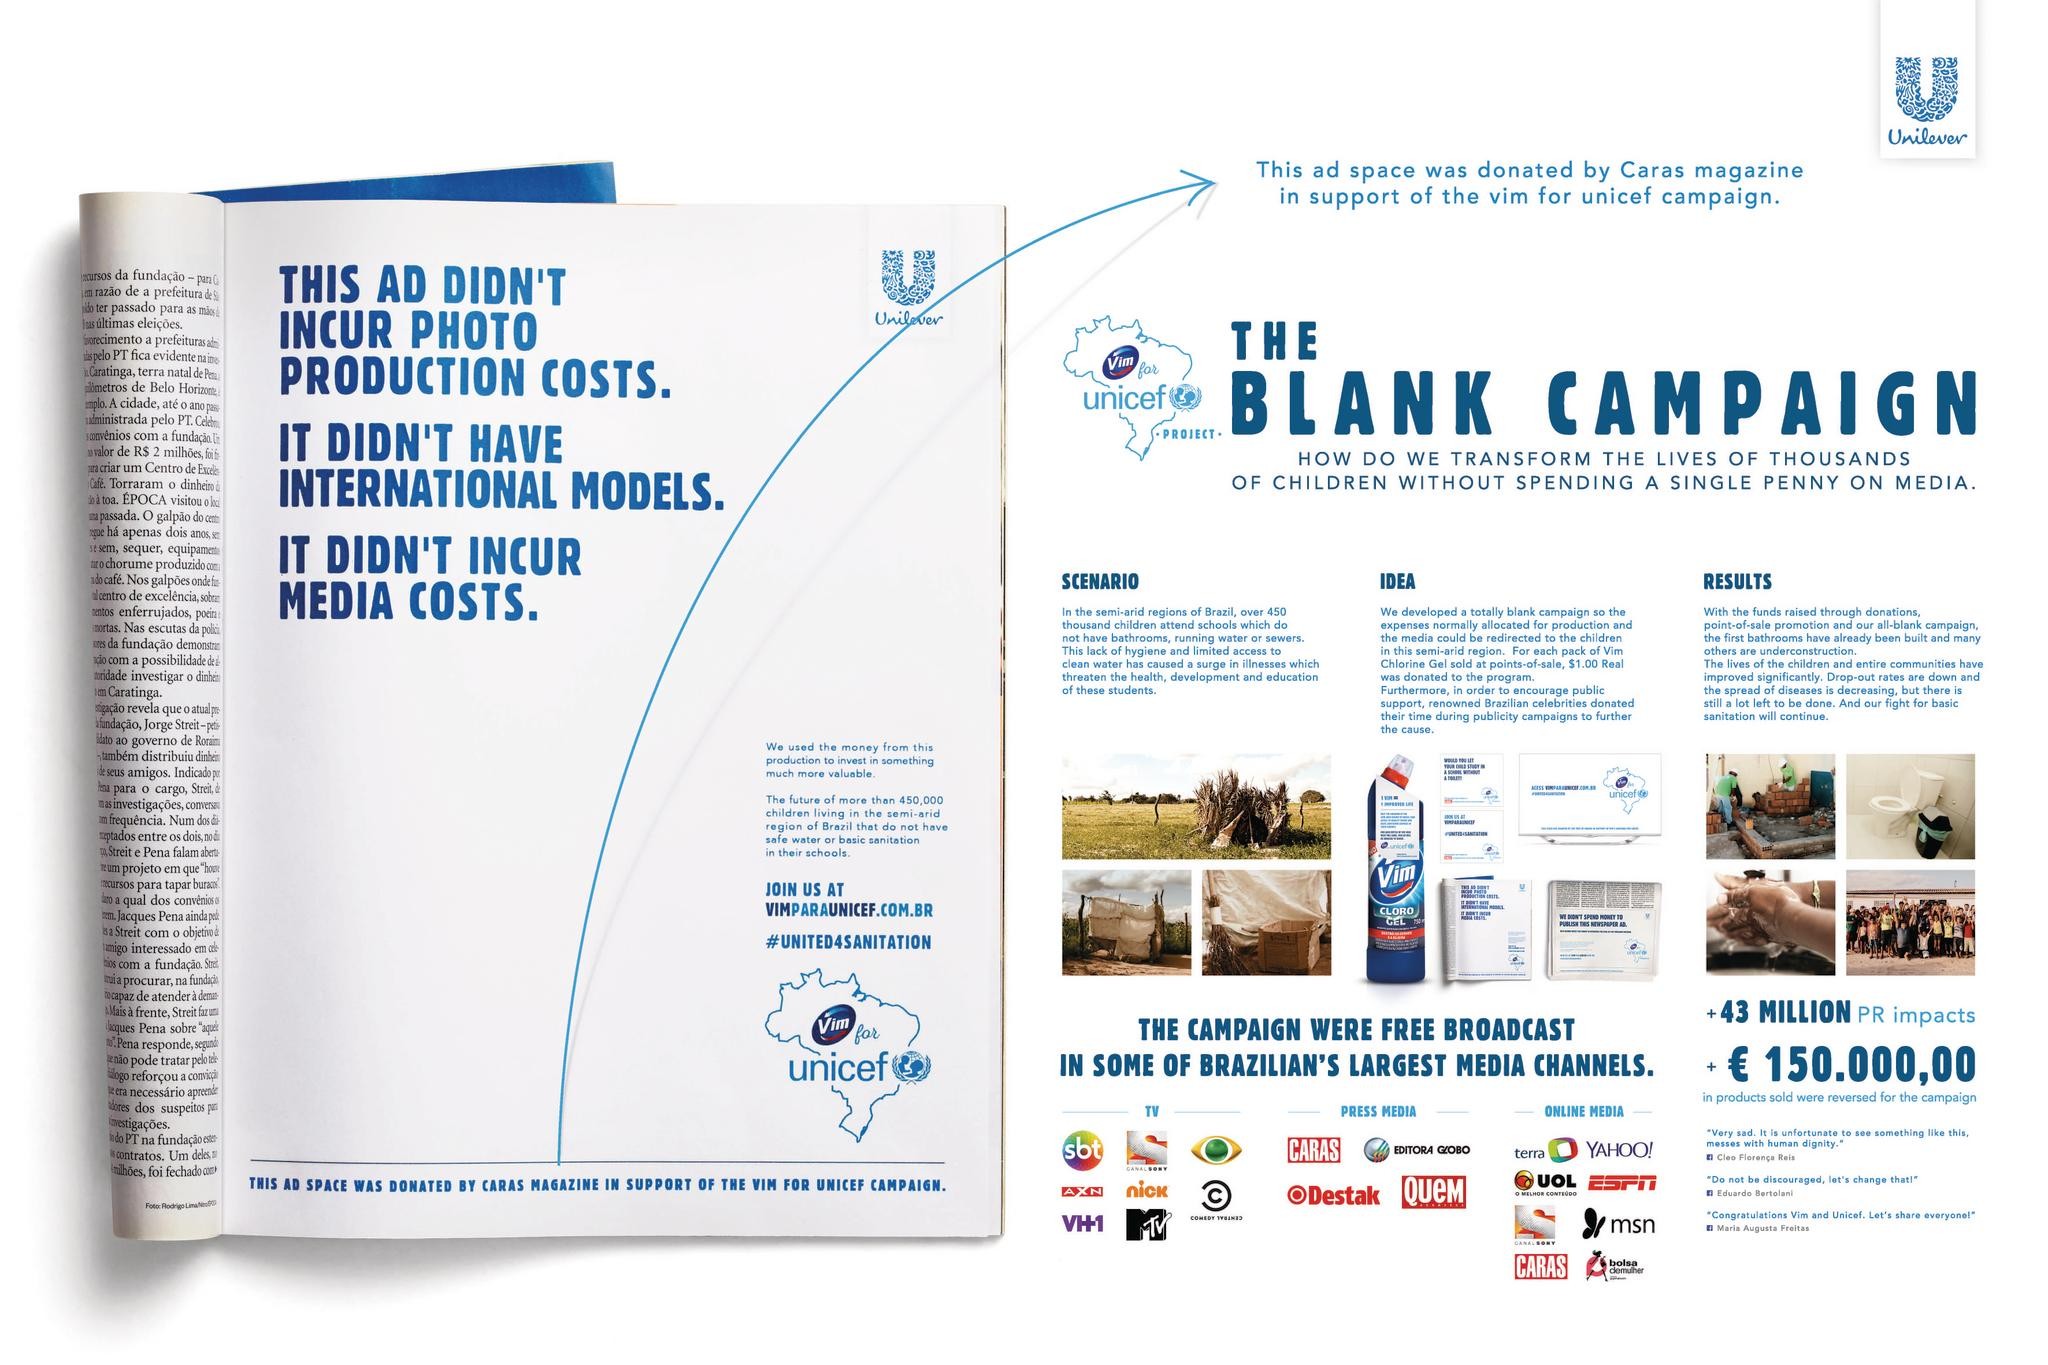 THE BLANK CAMPAIGN